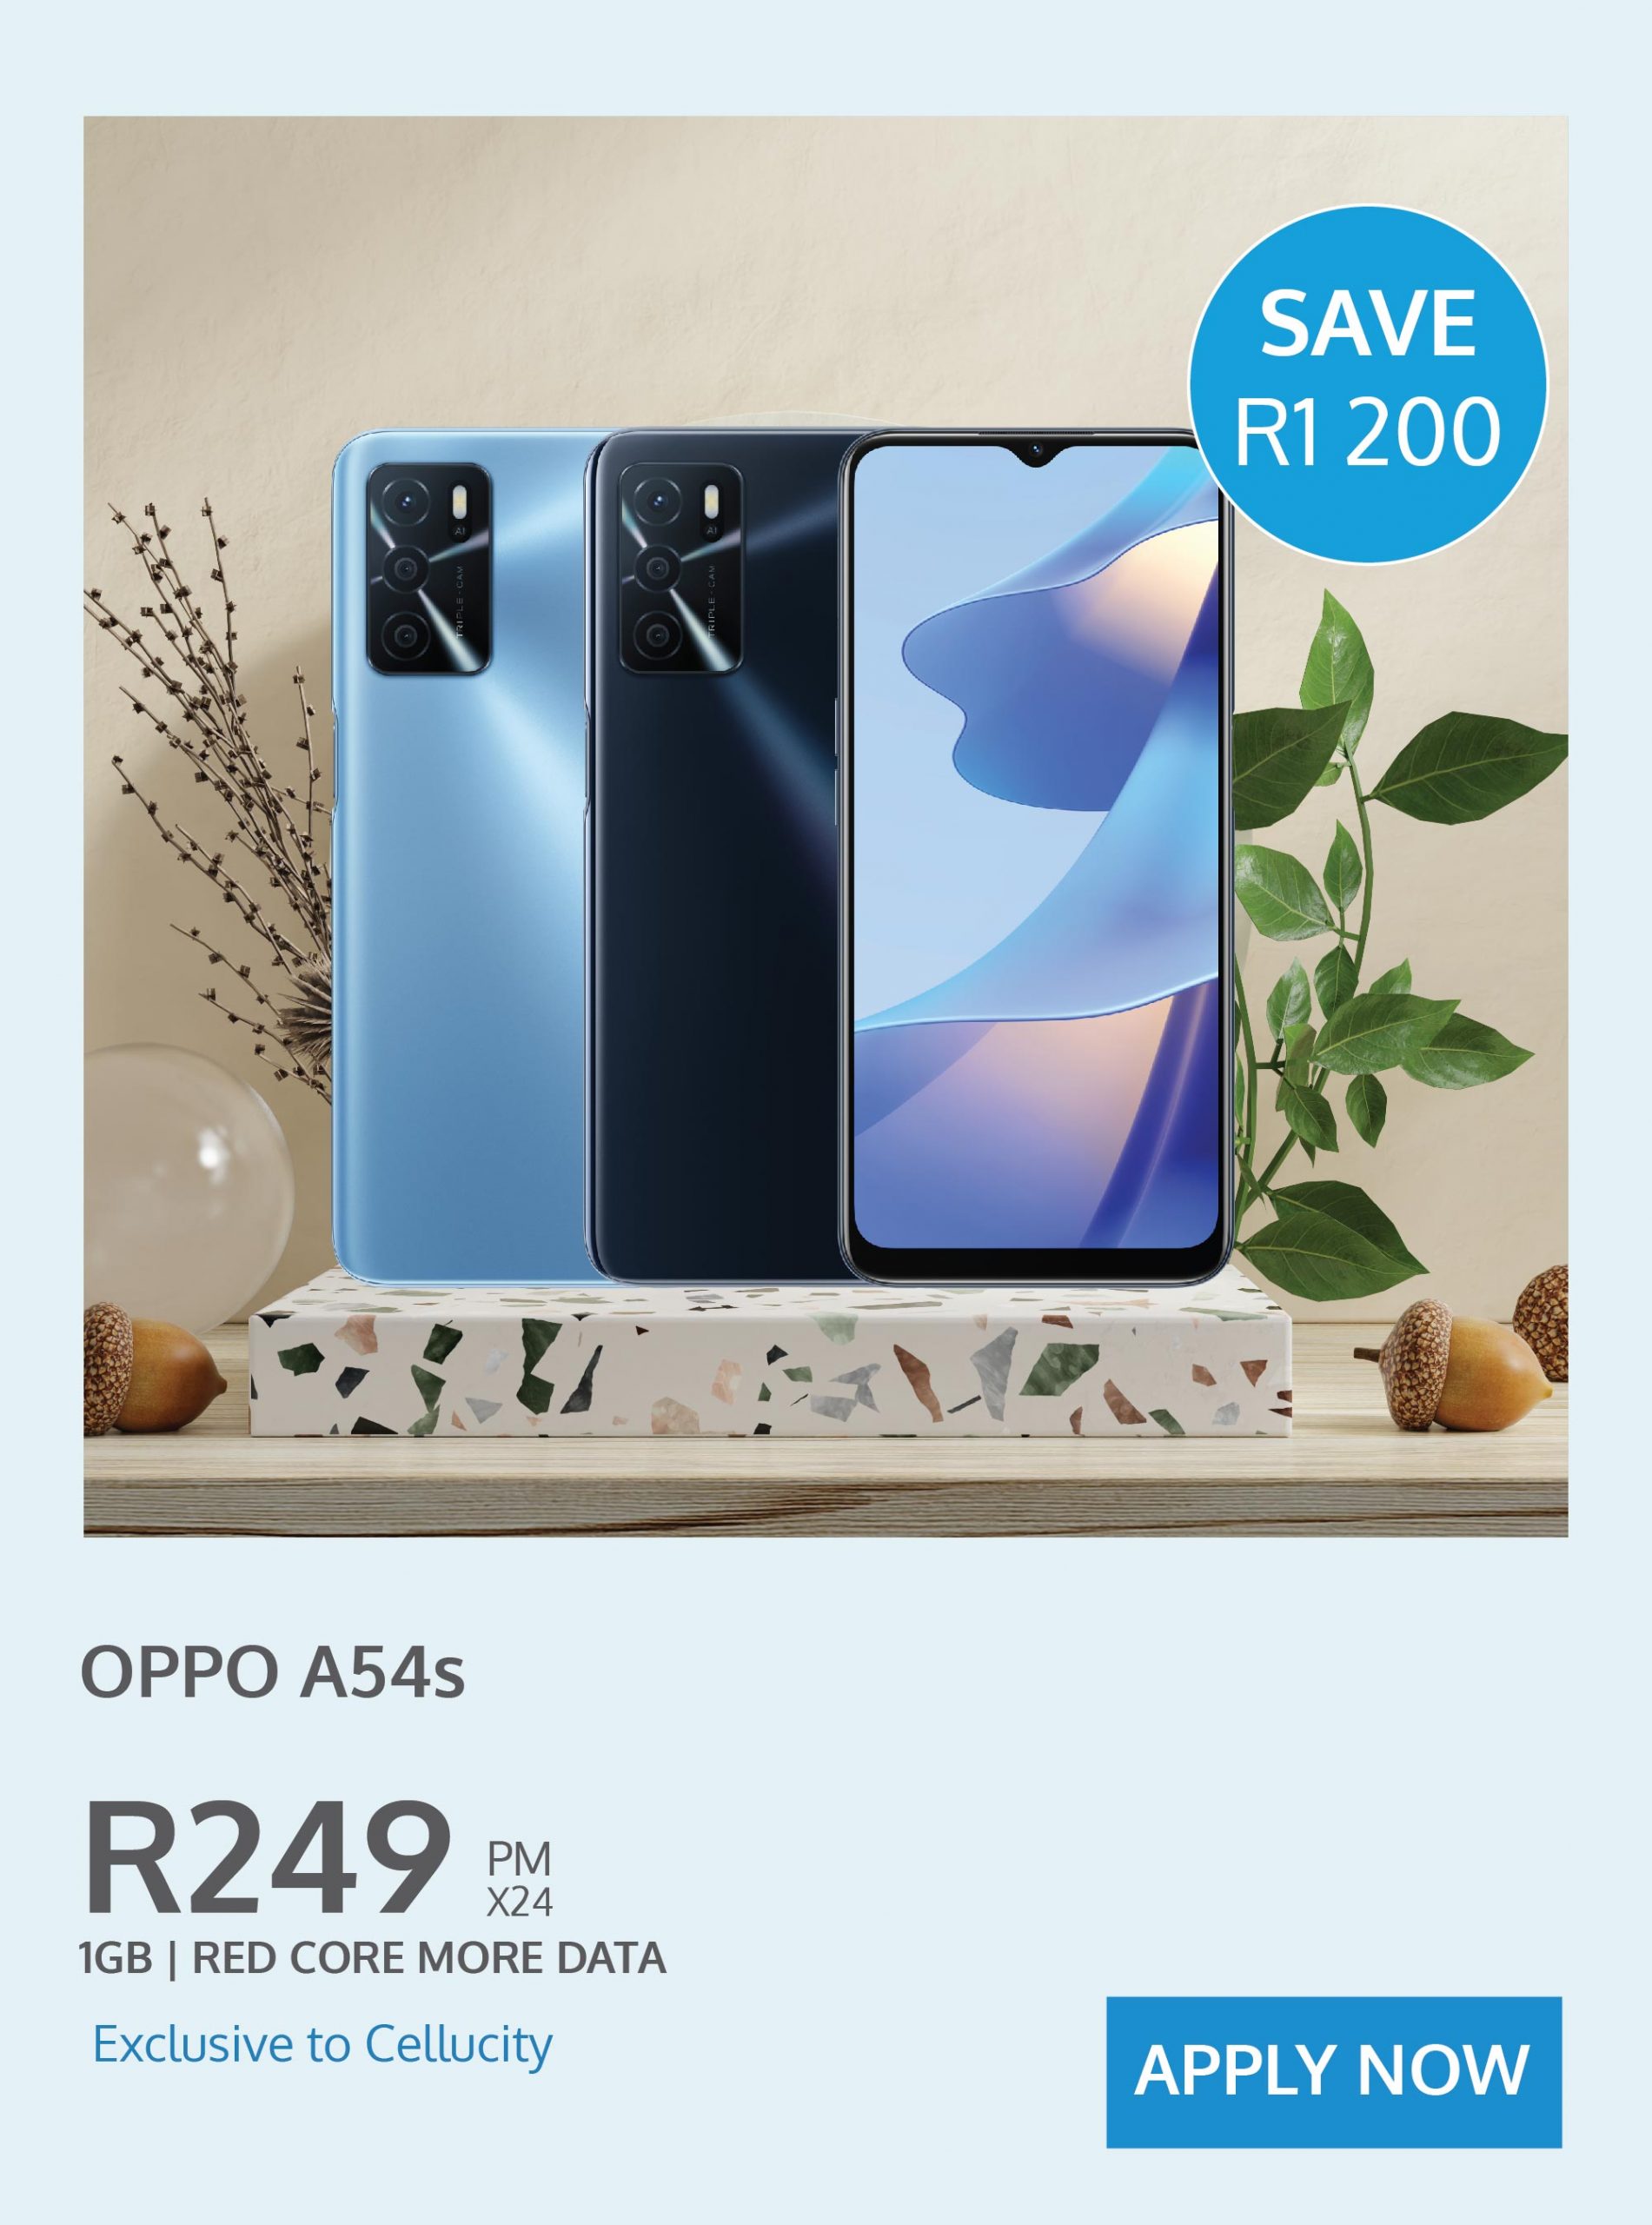 Oppo A54s contract deal